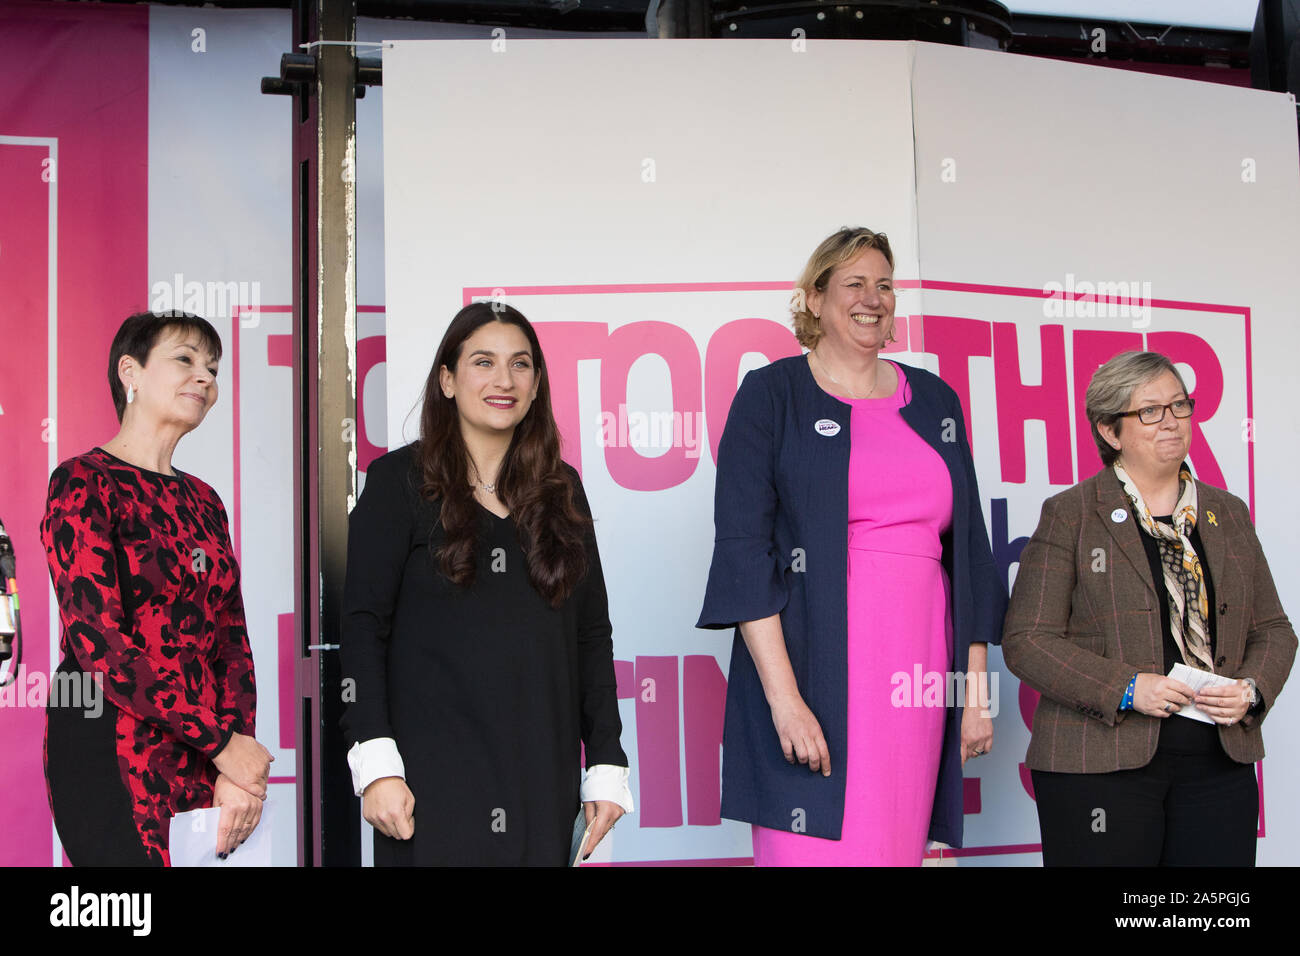 Westminster, London, UK. 19 October 2019. (L to R) Caroline Lucas Green Party, Luciana Berger MP Liberal Democrat, Antoinette Sandbach MP Independent Group and Jo Cherry MP SNP wait on stage ready to address the rally on Parliament Square. MPs have just voted in favour of Oliver Letwin MP amendment to the government’s Brexit Deal. Hundreds of thousands supporters of the 'People's Vote' converge on Westminster for a ‘final say’ on the Prime Minister Boris Johnson’s new Brexit deal. Stock Photo